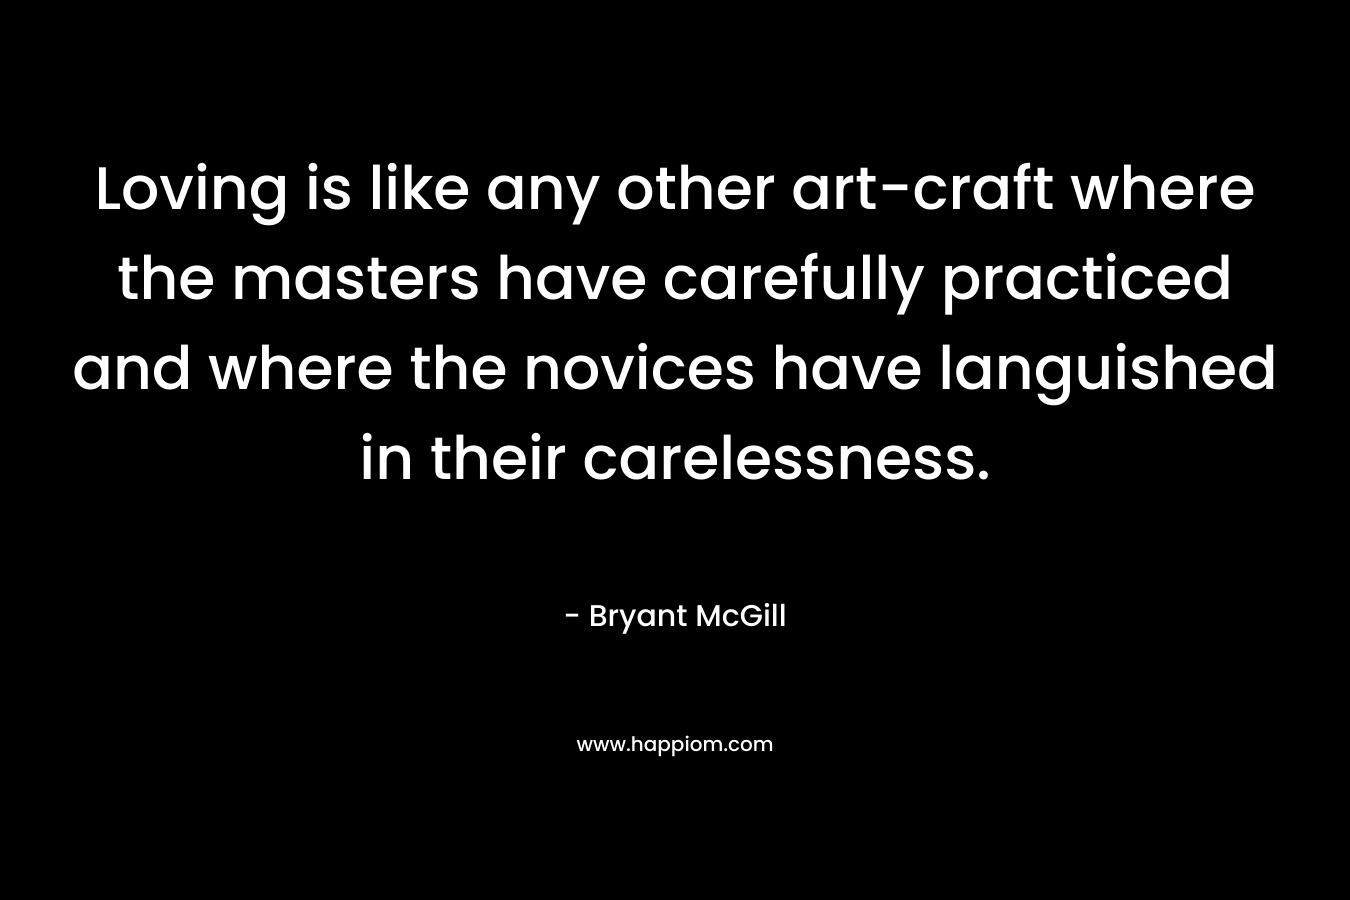 Loving is like any other art-craft where the masters have carefully practiced and where the novices have languished in their carelessness. – Bryant McGill